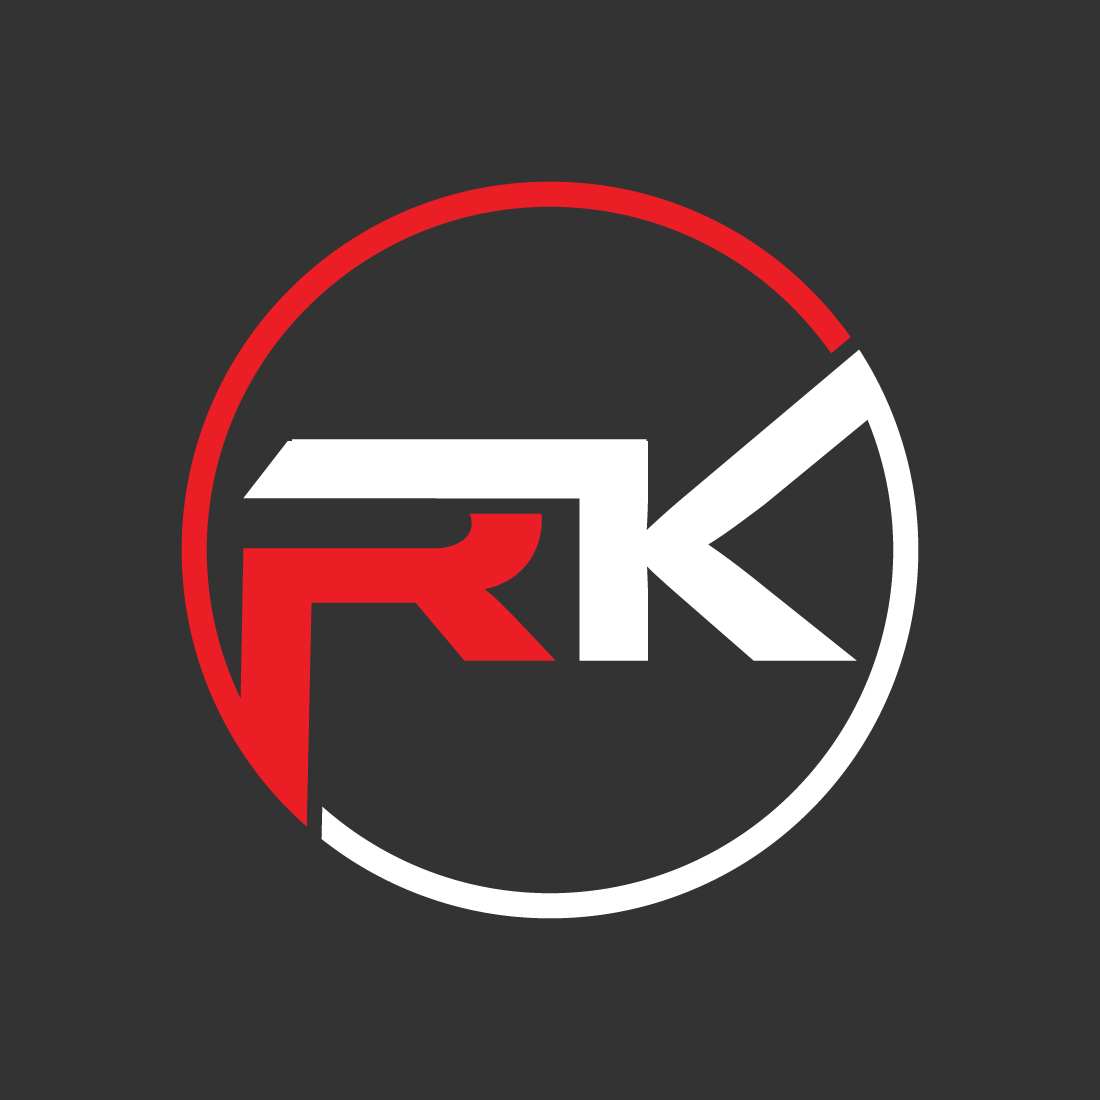 Circle RK letter logo template design preview image.